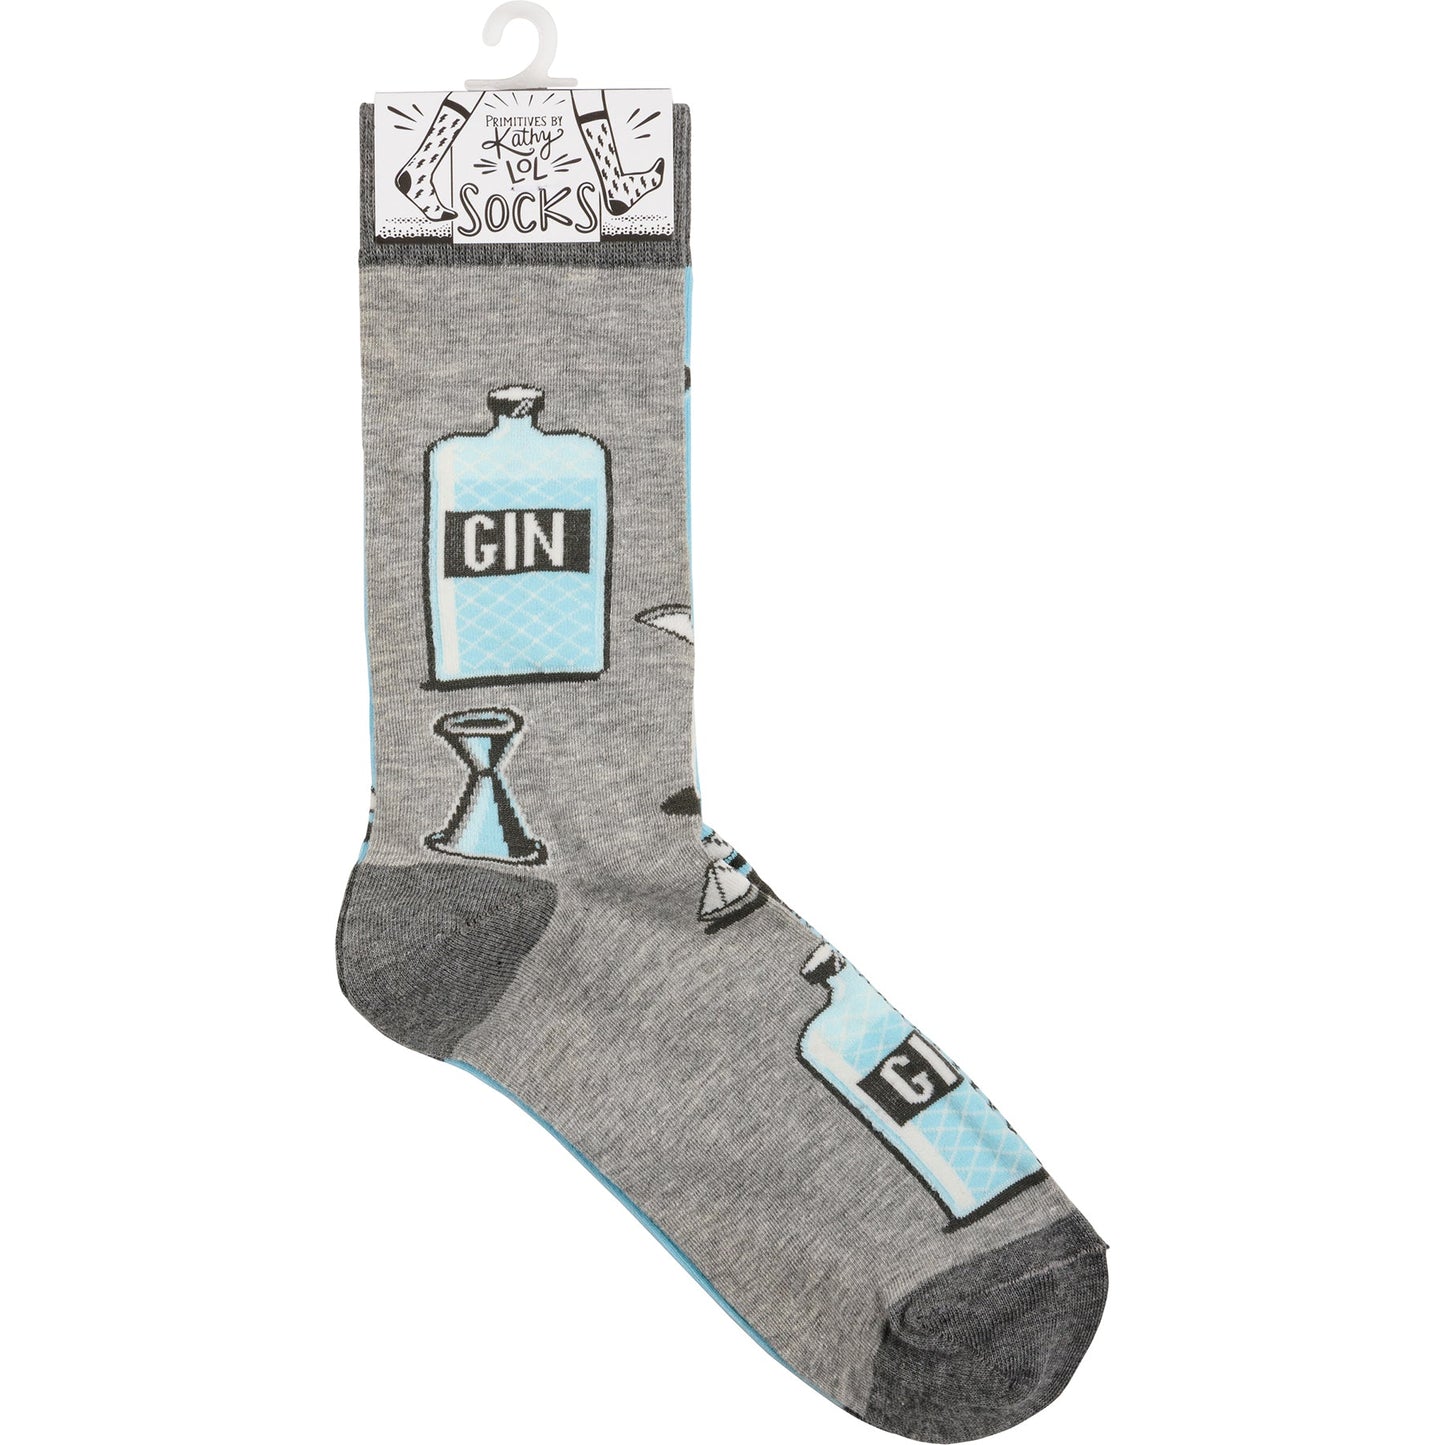 Gin & Tonic Mismatched Funny Novelty Socks in Gray and Blue